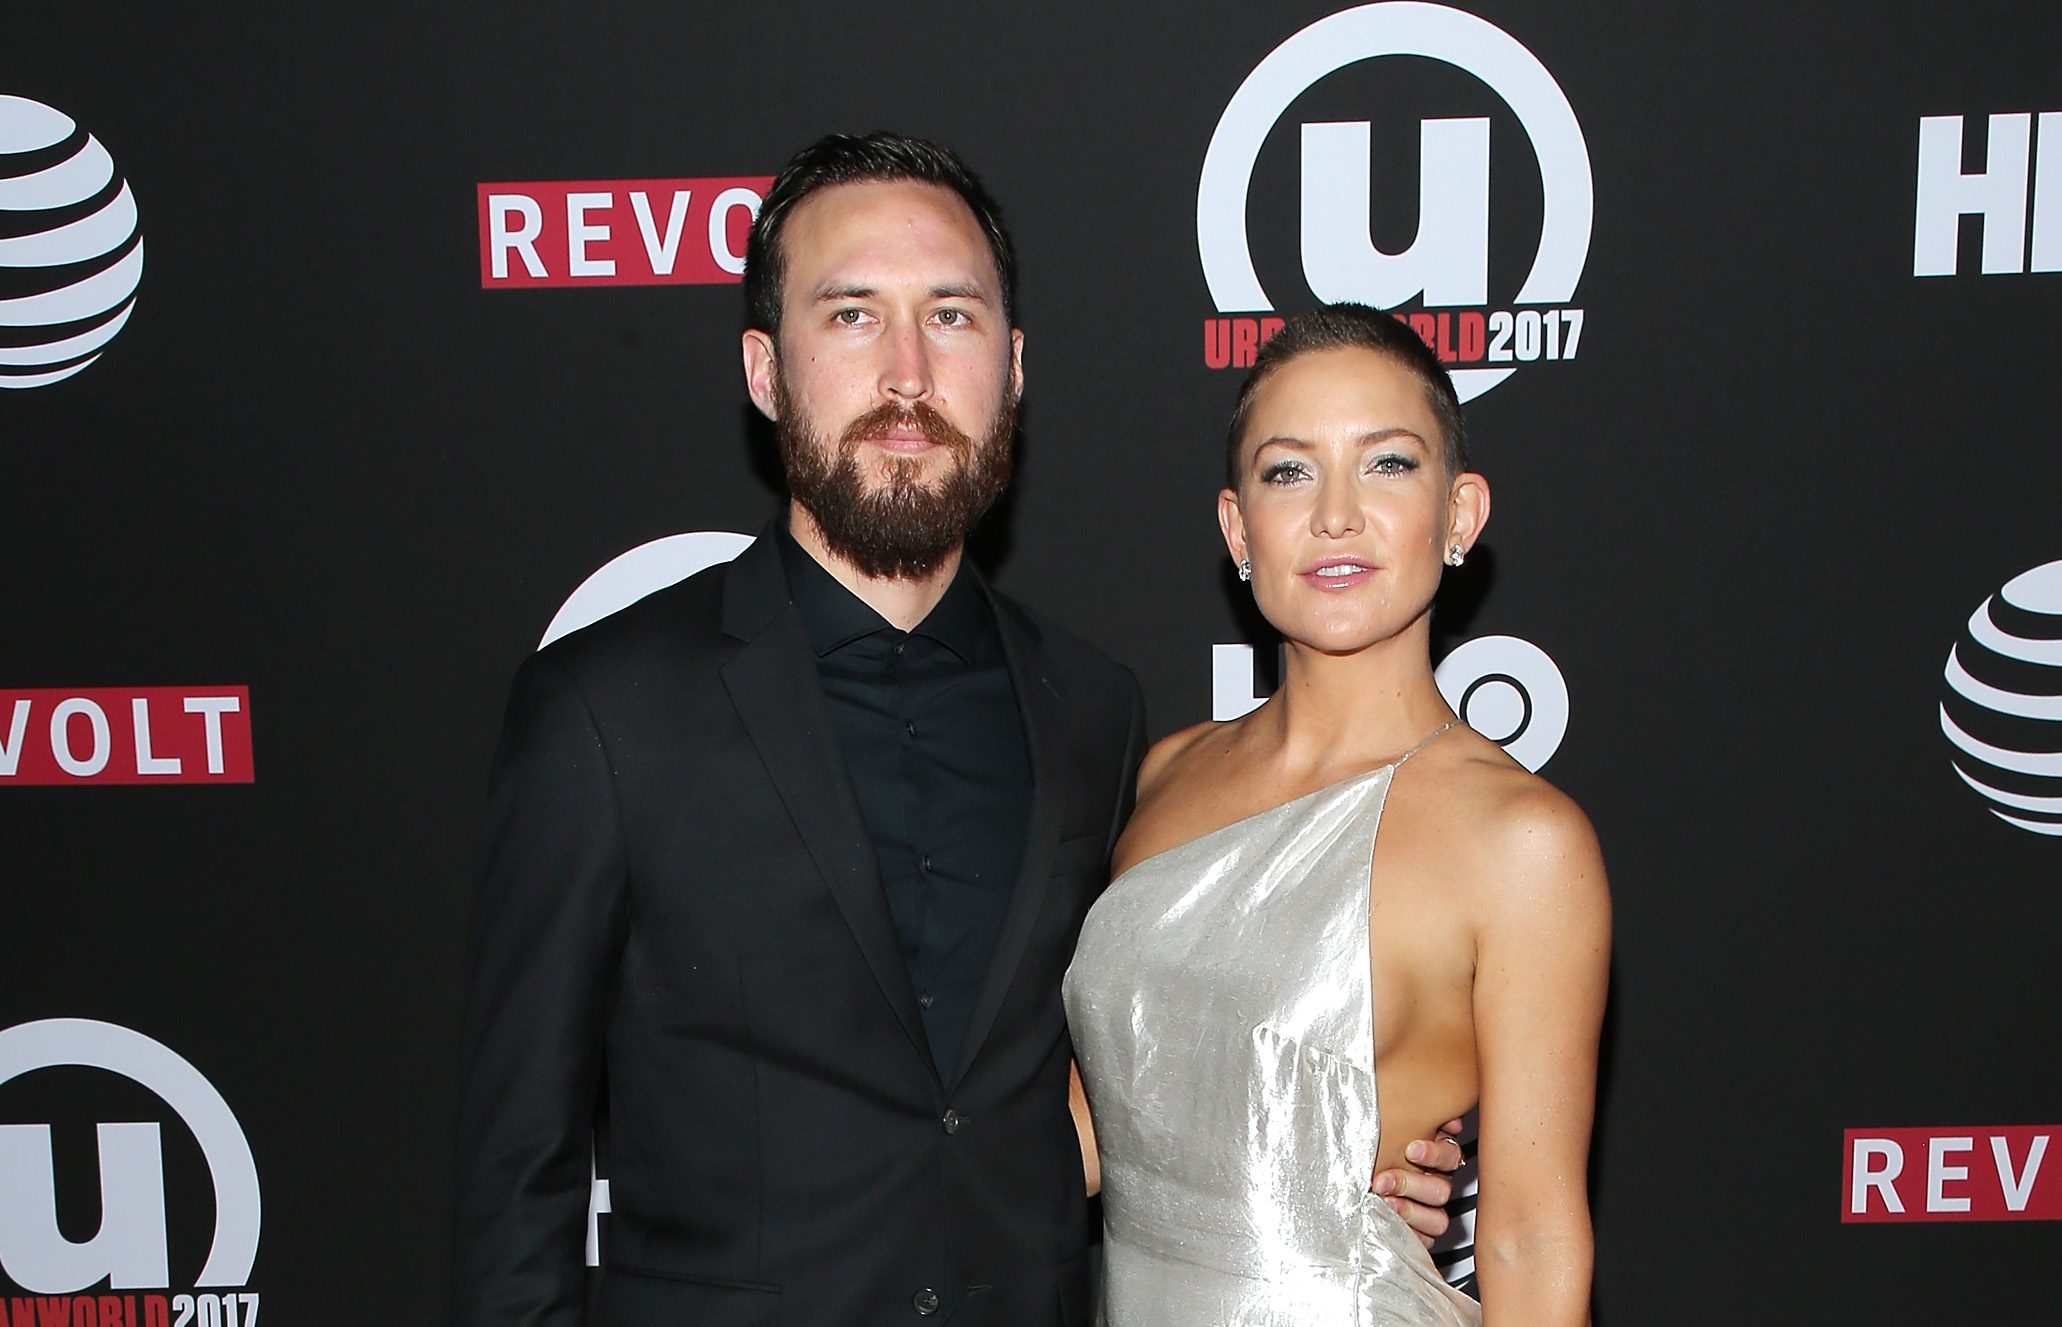 Kate Hudson Is Expecting Her First Bub With Partner Danny Fujikawa